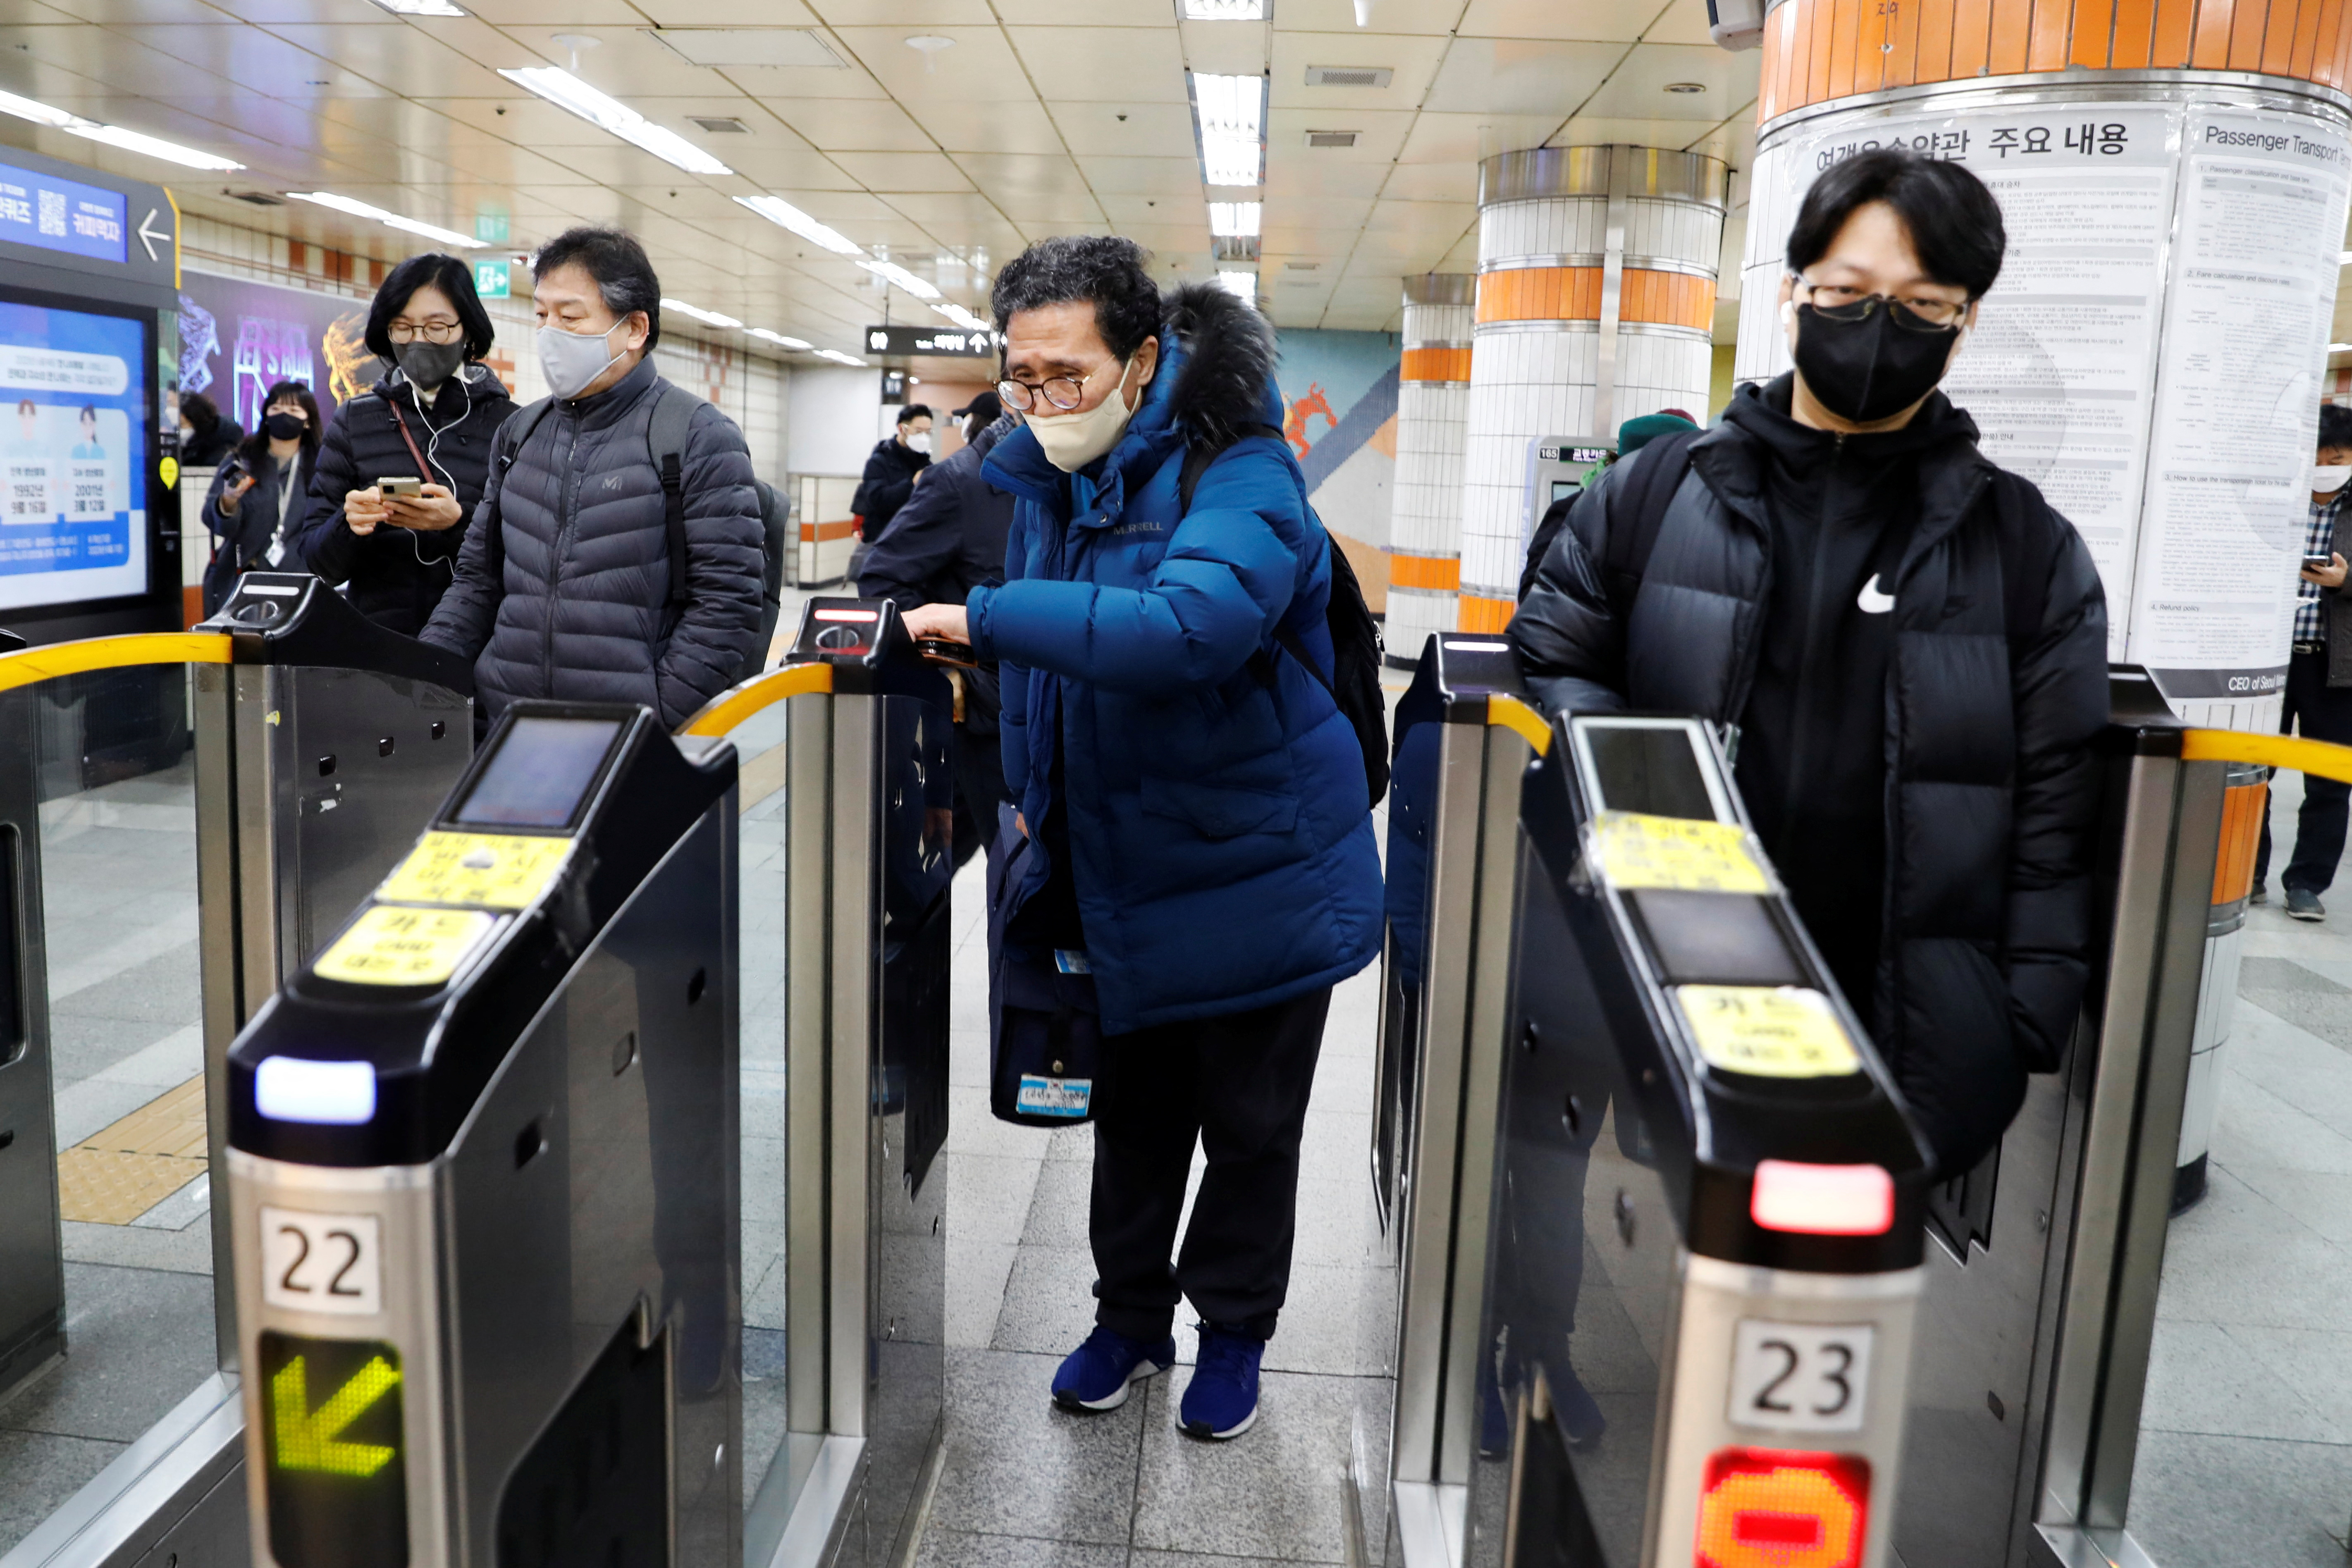 Free subway for seniors sparks crisis in aging South Korea